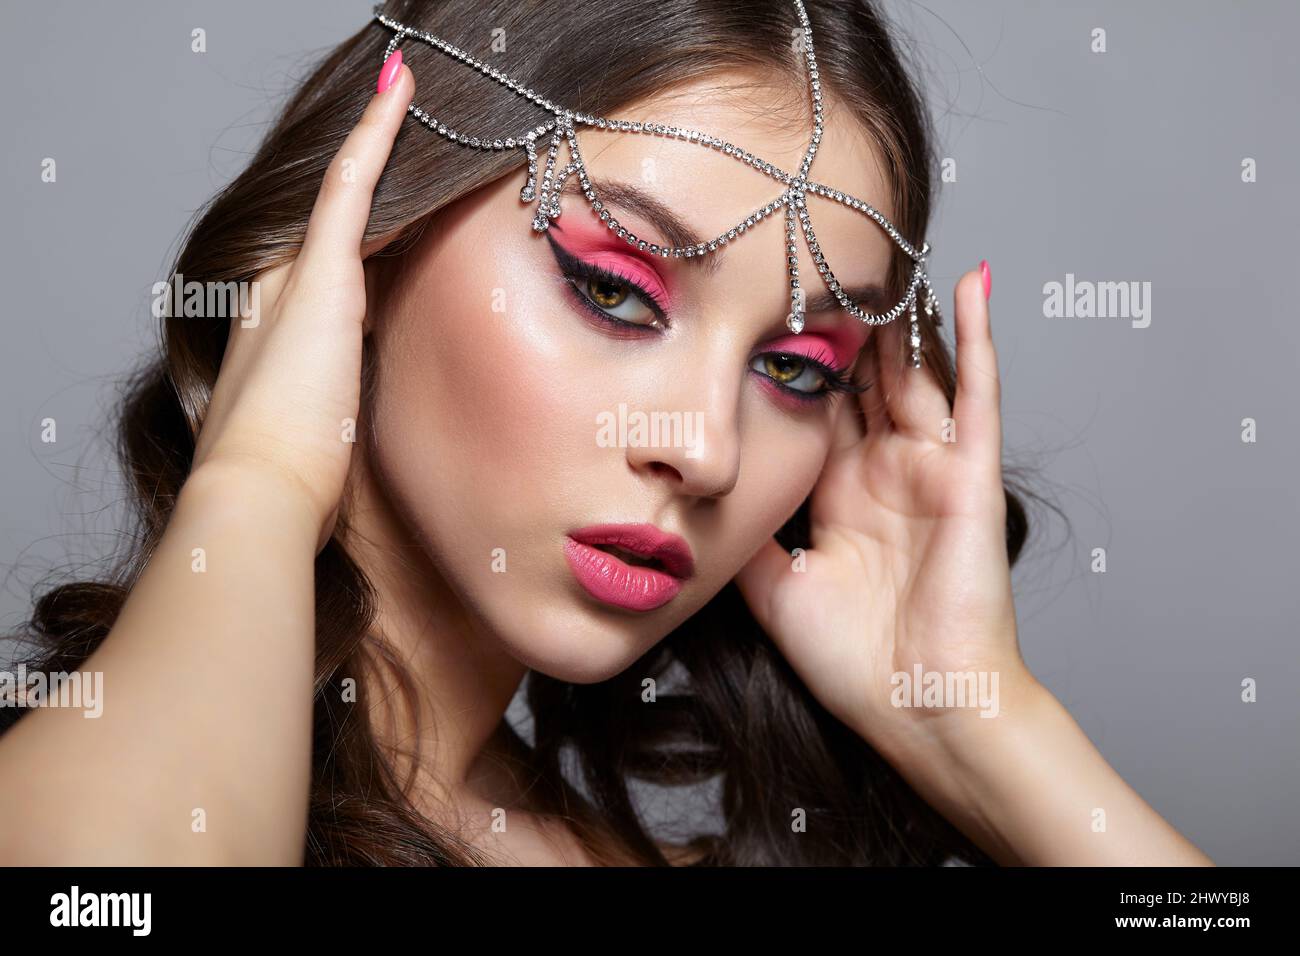 Beauty portrait of young woman with hands near face. Brunette girl with an oriental appearance with pink makeup and rhinestone embellishment on the he Stock Photo